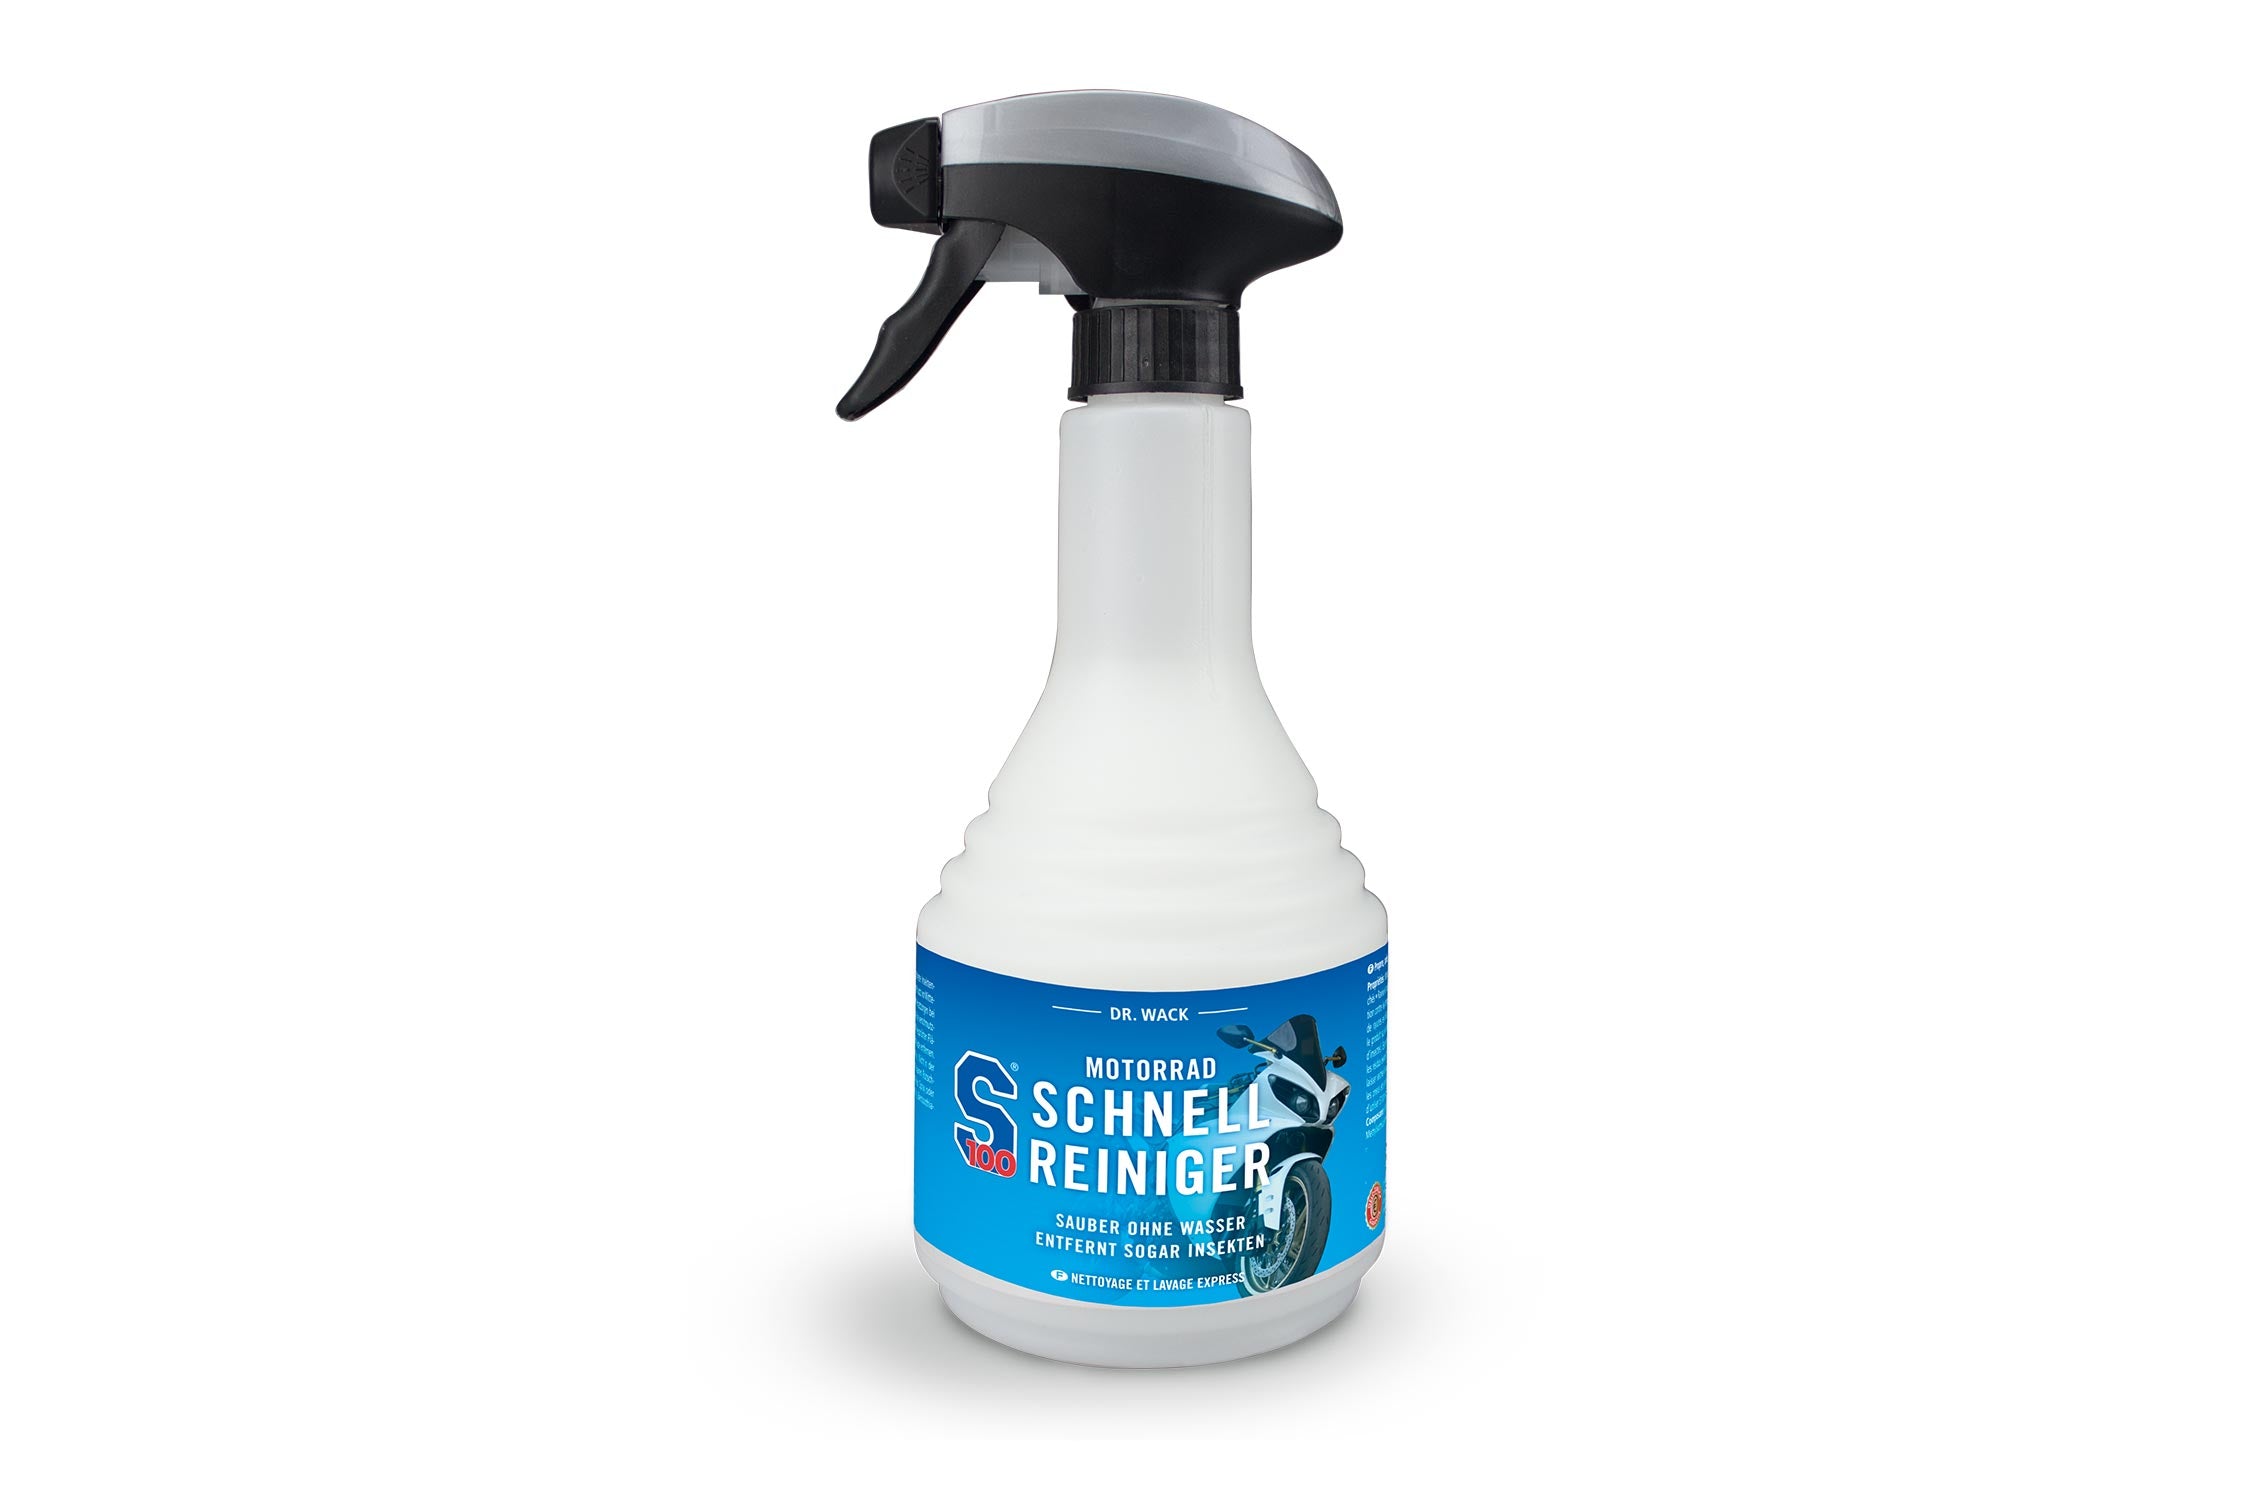 Cleaning - Quick Cleaner (Spray + Wipe)